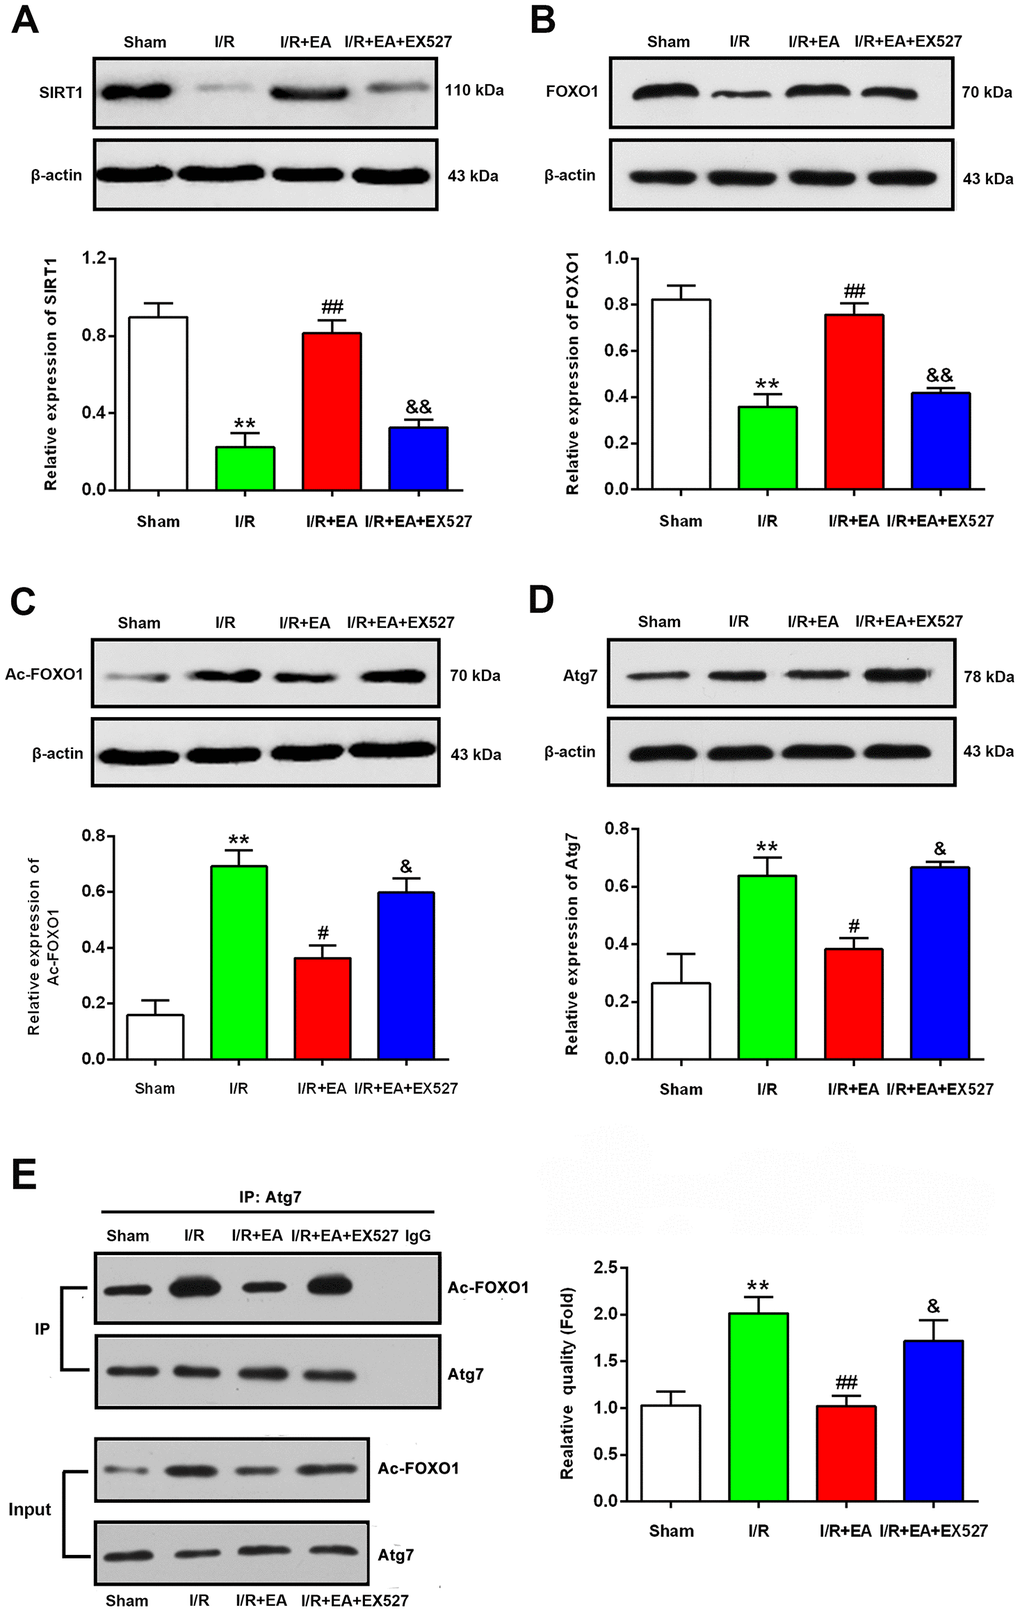 EA pretreatment up-regulated the protein levels of SIRT1, FOXO1, down-regulated the protein levels of Ac-FOXO1 and Atg7 in the peri-ischemic cortex after 24 h of reperfusion. (A) Protein band and relative expression of SIRT1 in the peri-ischemic cortex. (B) Protein band and relative expression of FOXO1 in the peri-ischemic cortex. (C) Protein band and relative expression of Ac-FOXO1 in the peri-ischemic cortex. (D) Protein band and relative expression of Atg7 in the peri-ischemic cortex. (E) Co-IP between Atg7 and Ac-FOXO1 in the peri-ischemic cortex and the relative quality of Ac-FOXO1 after normalization with Atg7, and input results of Atg7 and Ac-FOXO1. β-actin was used as a loading control. Data were presented as the mean ± SEM (n=3). **Pvs. sham group. #P##Pvs. I/R group; &P&&Pvs. I/R + EA group.